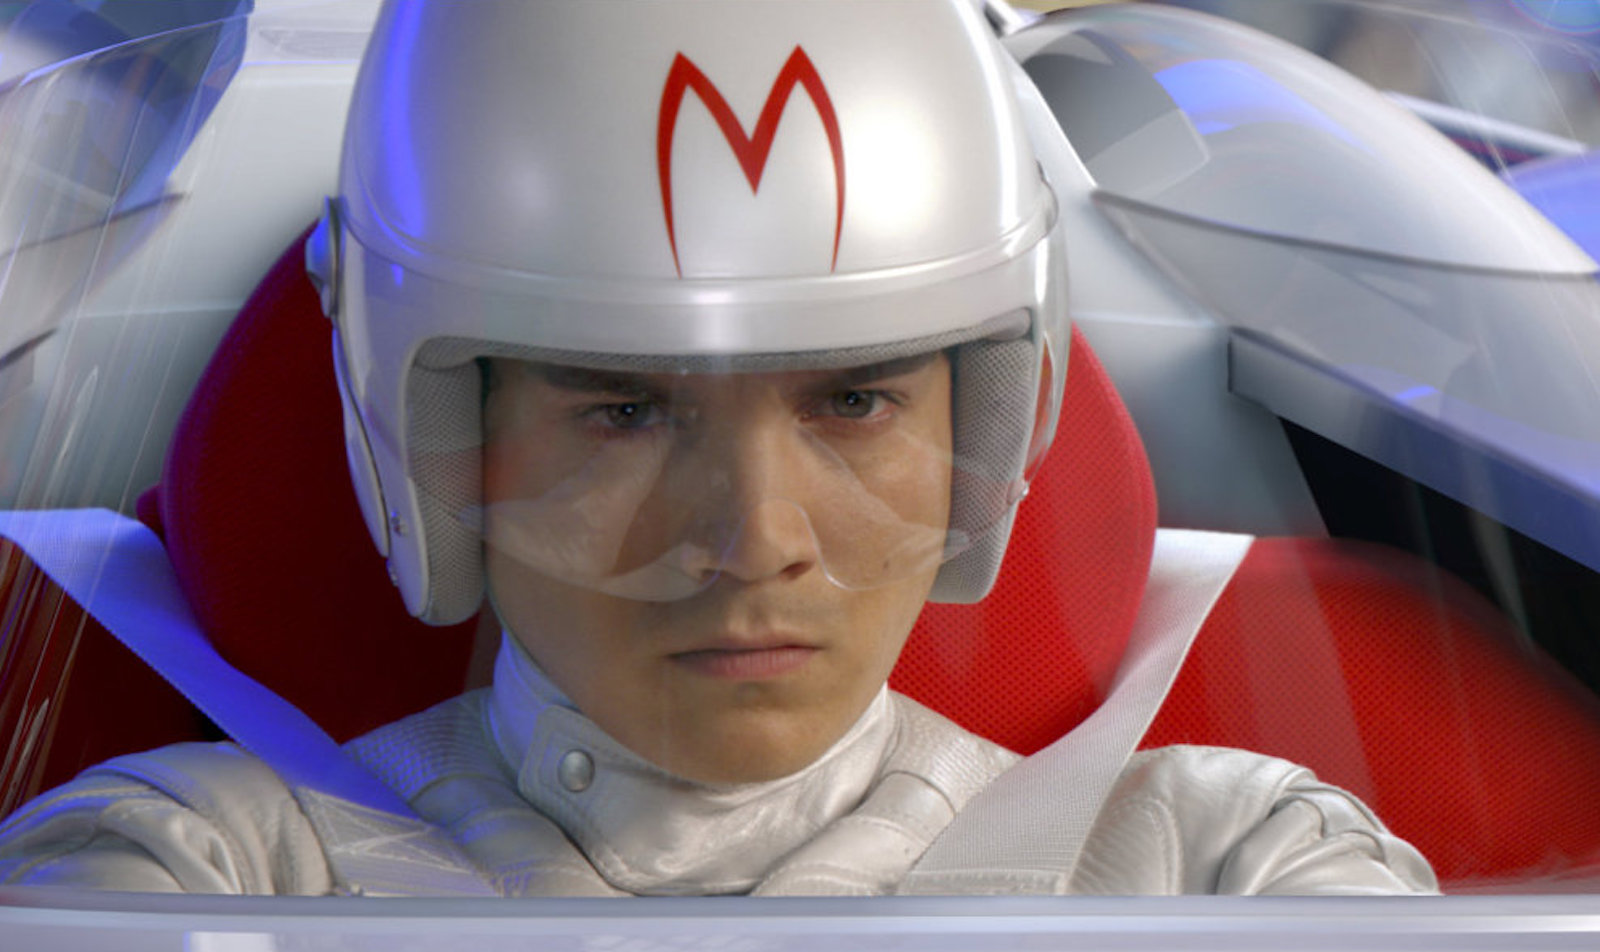 A serious-looking car racer in goggles and white helmet with a red M painted on the front is strapped into his vehicle, looking straight ahead with determination.